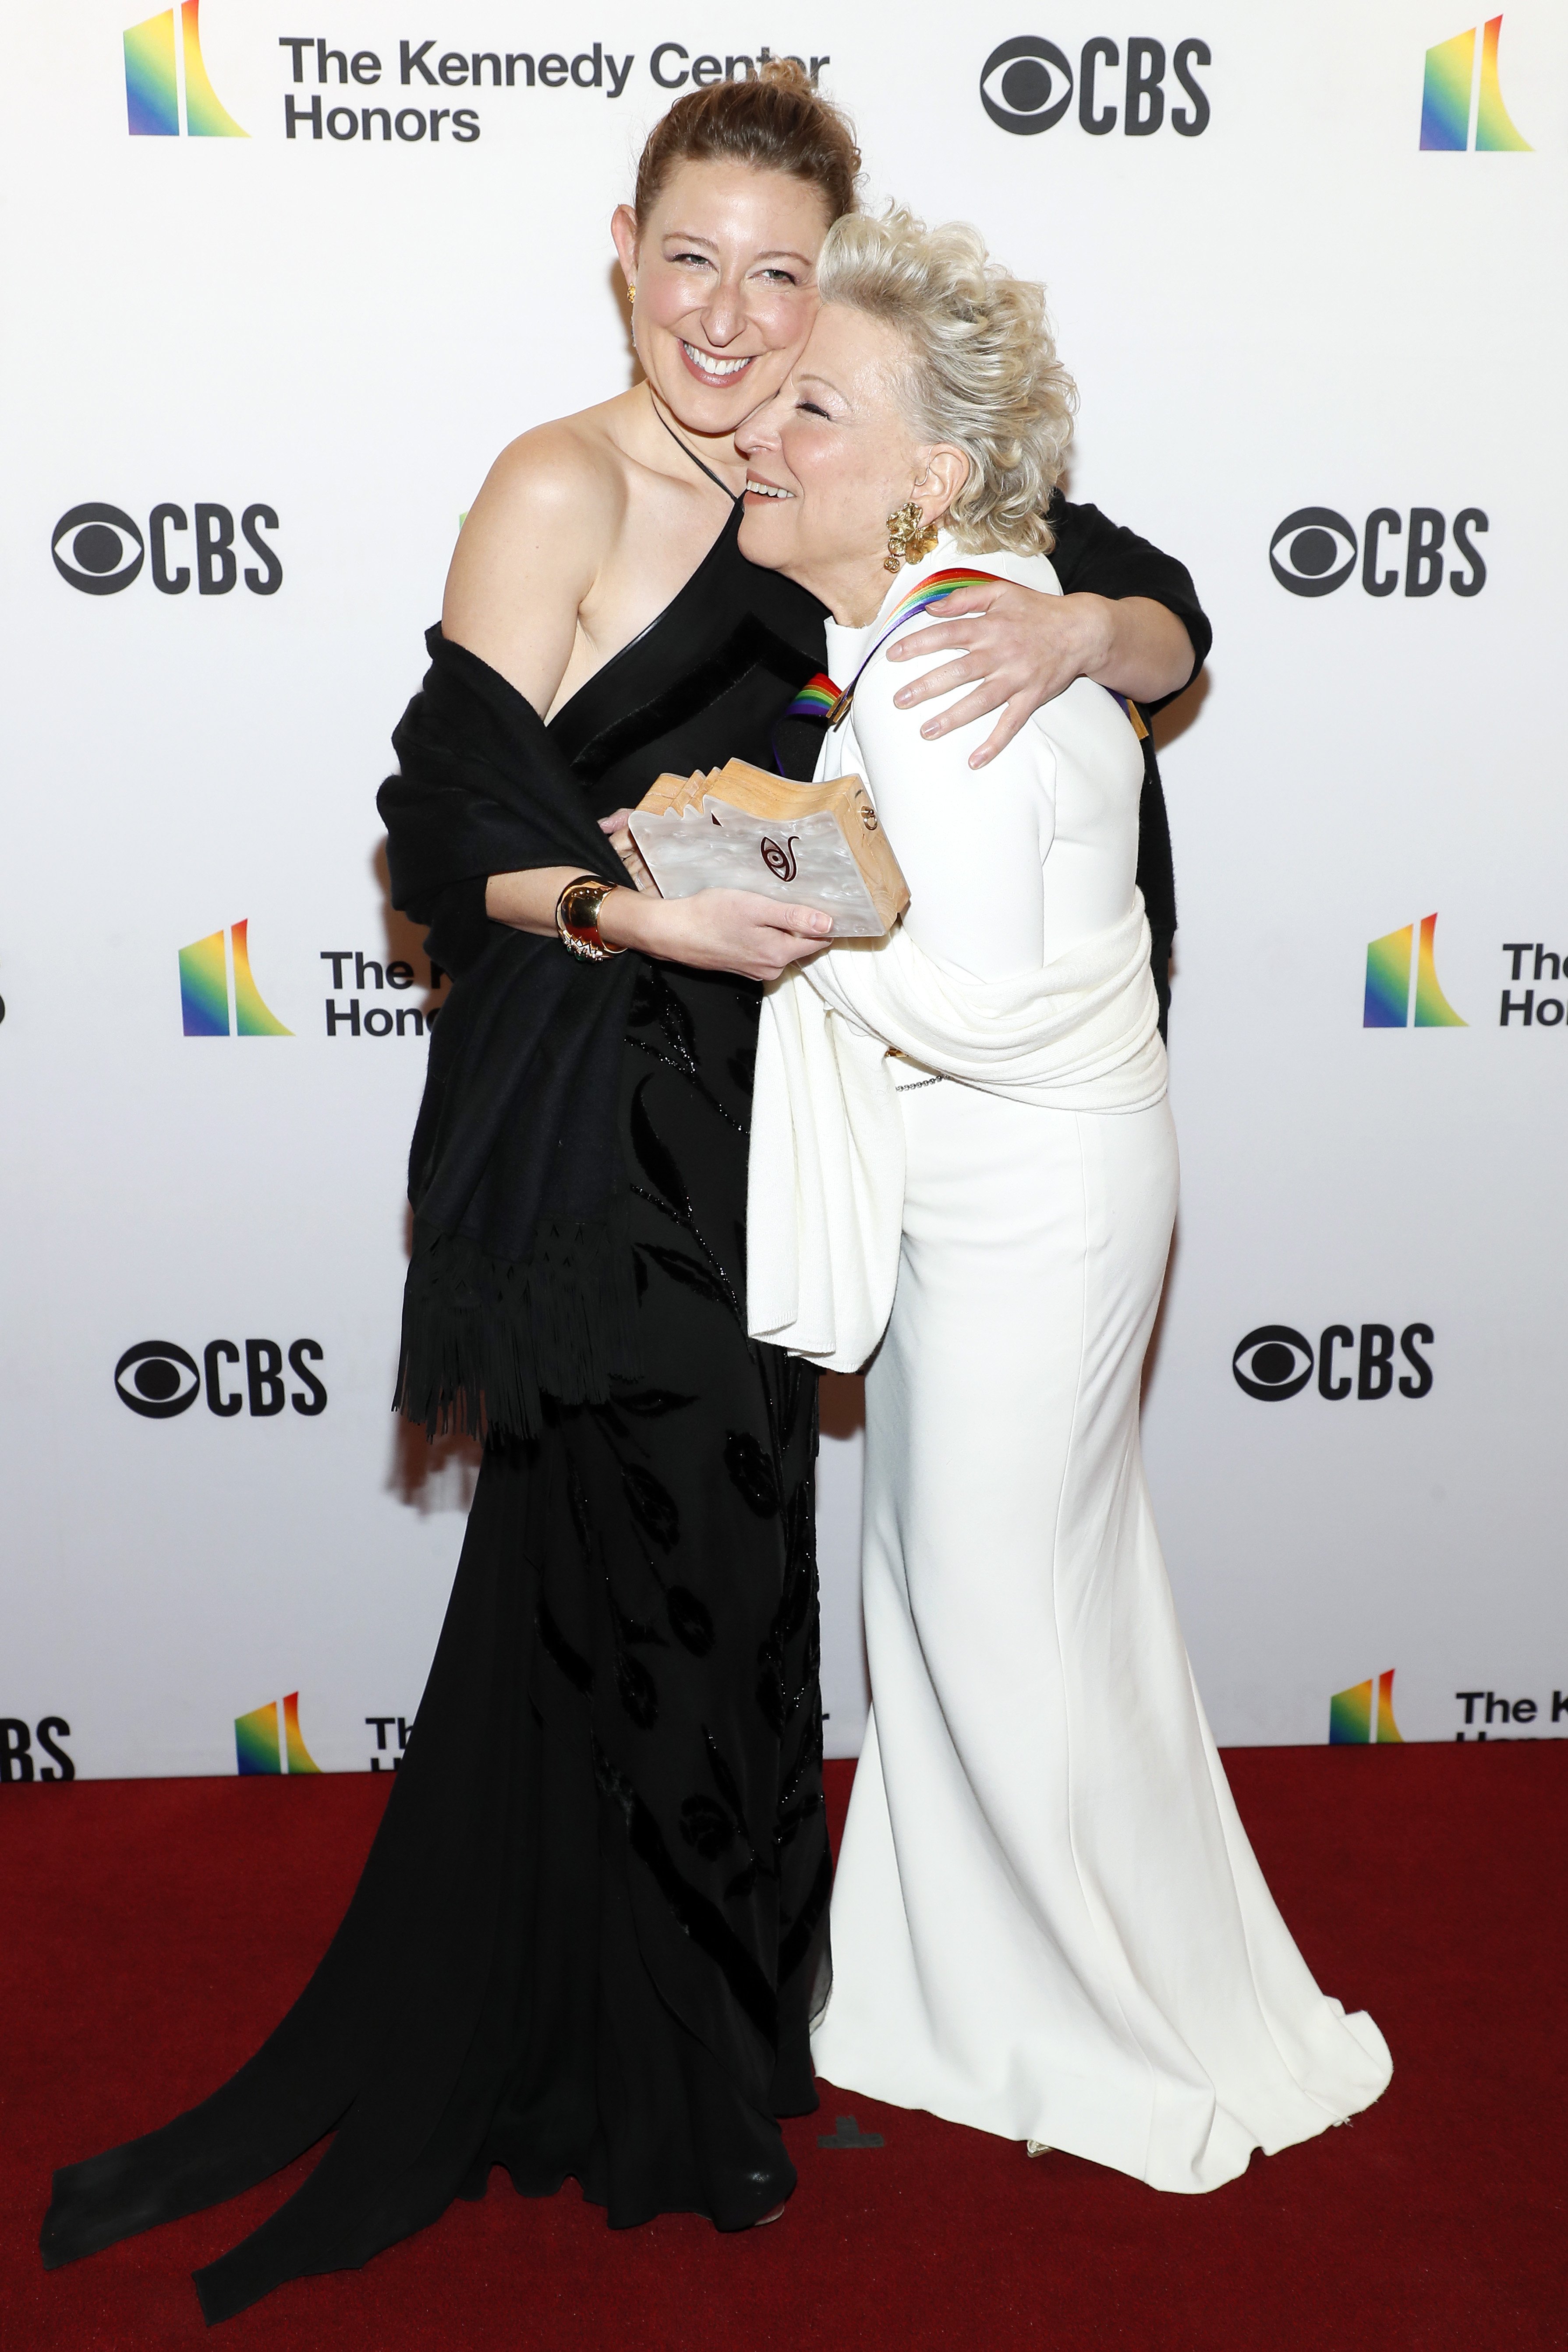 Honoree Bette Midler and daughter Sophie Von Haselberg at the 44th Kennedy Center Honors at The Kennedy Center on December 05, 2021 in Washington, DC. | Source: Getty Images